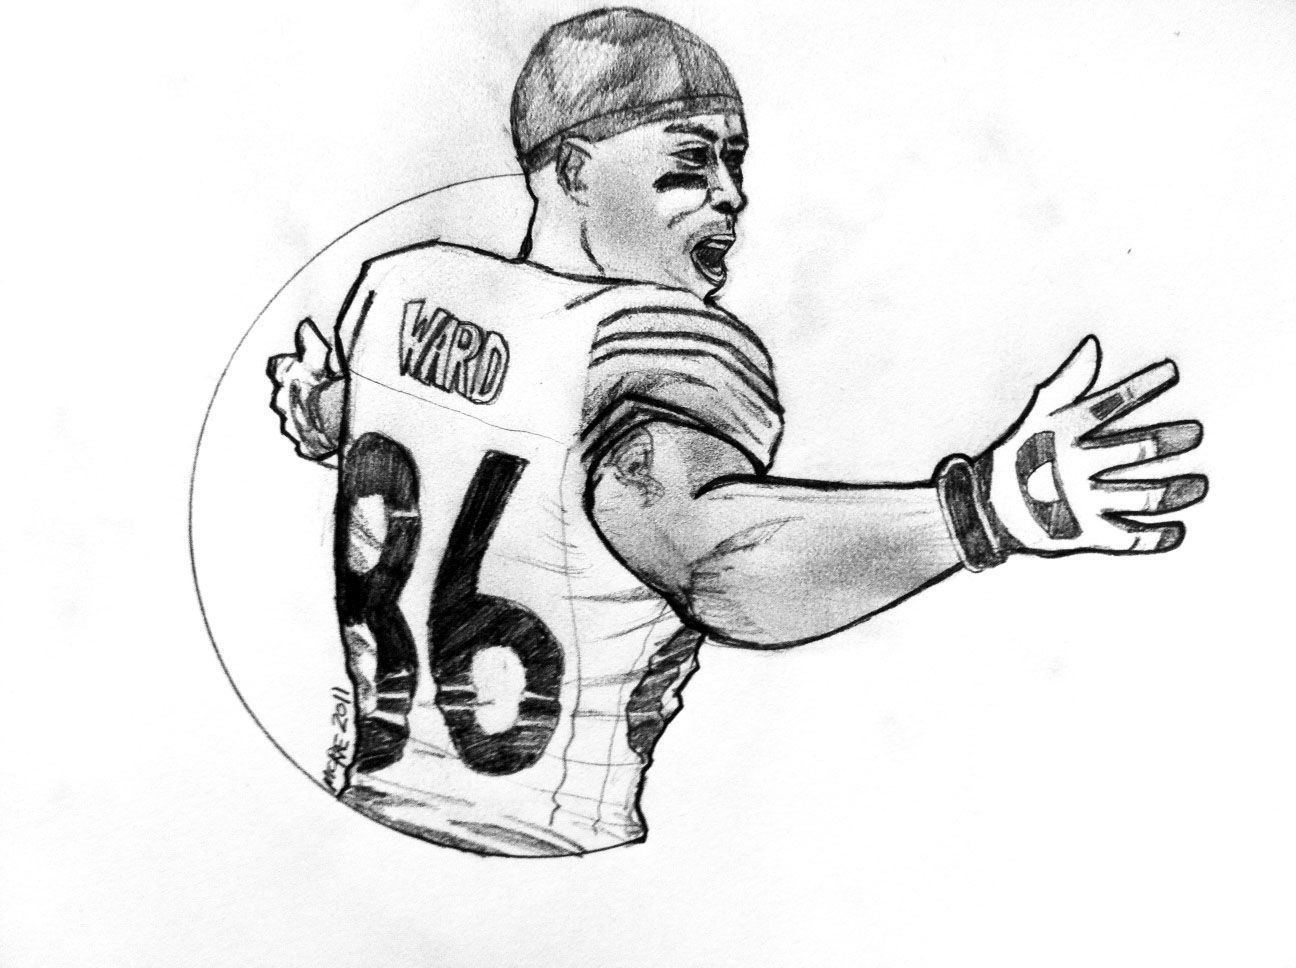 Coloring Pages Of Nfl Football Players - High Quality Coloring Pages